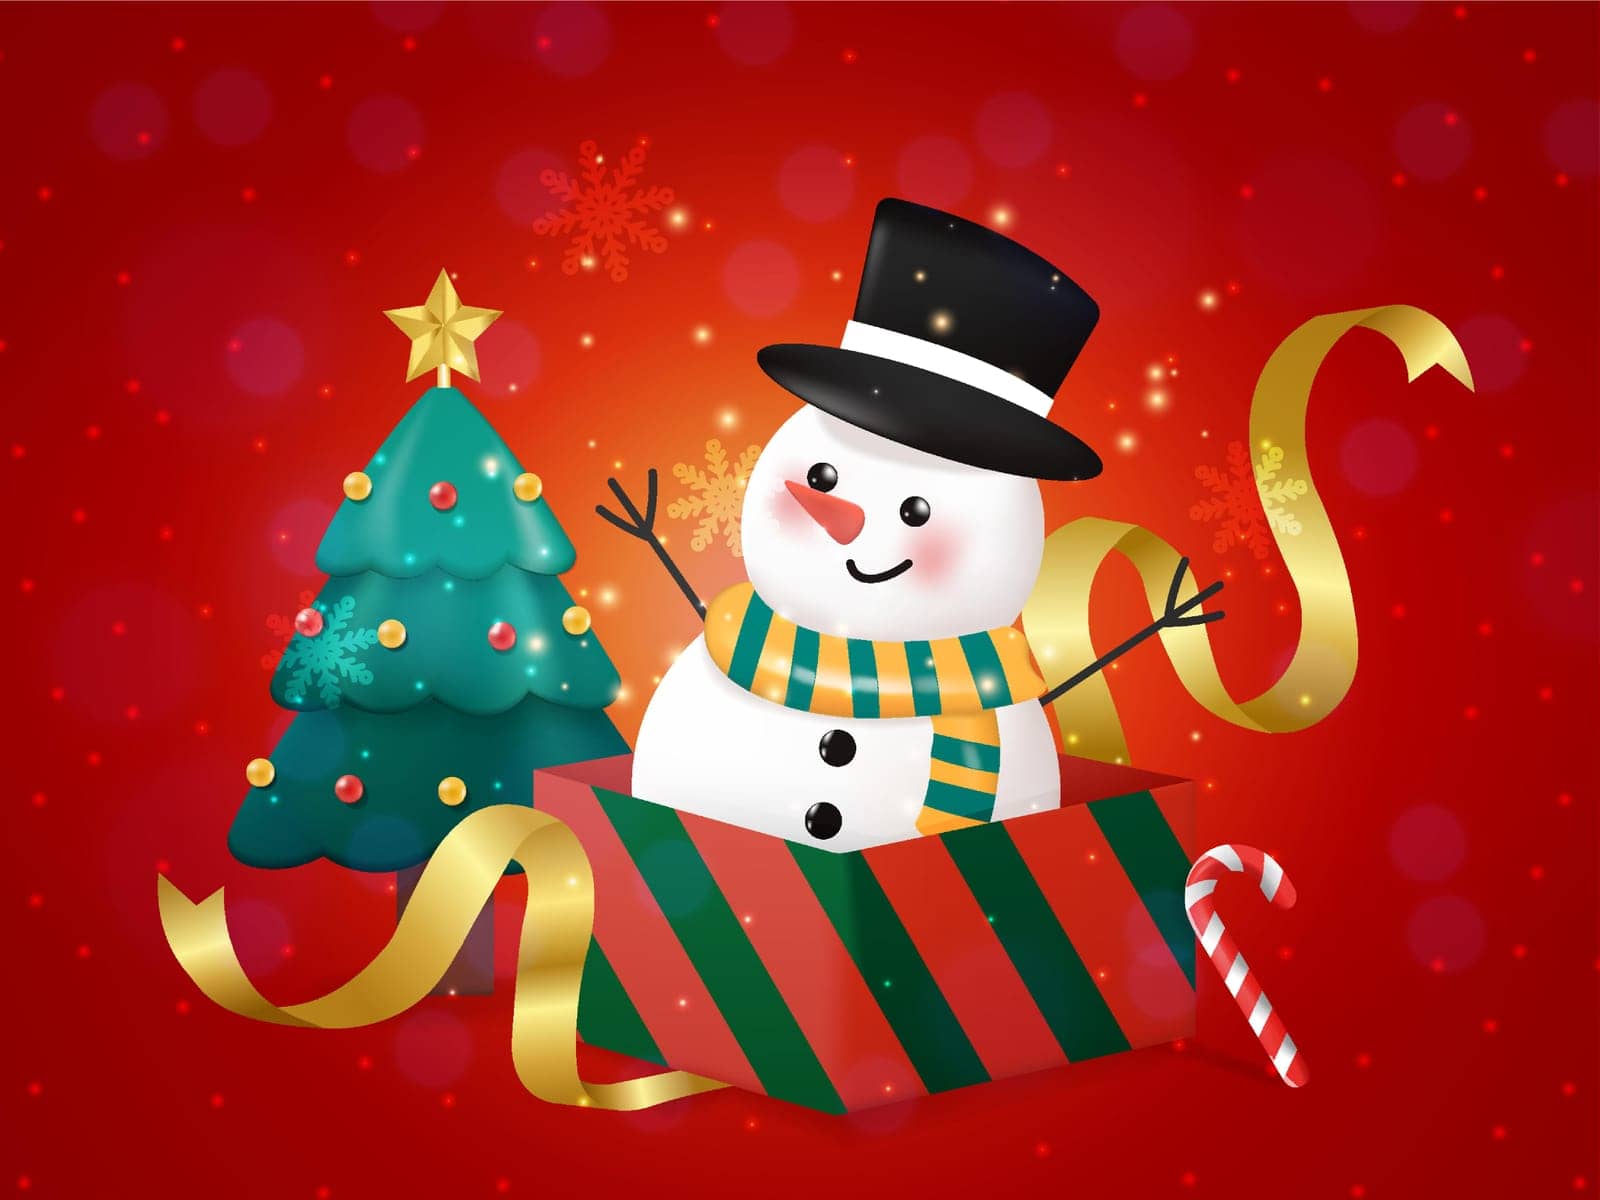 Merry Christmas and Happy Christmas companions. Snowman, candy and Christmas tree in Christmas snow scene on red background. vector illustration.